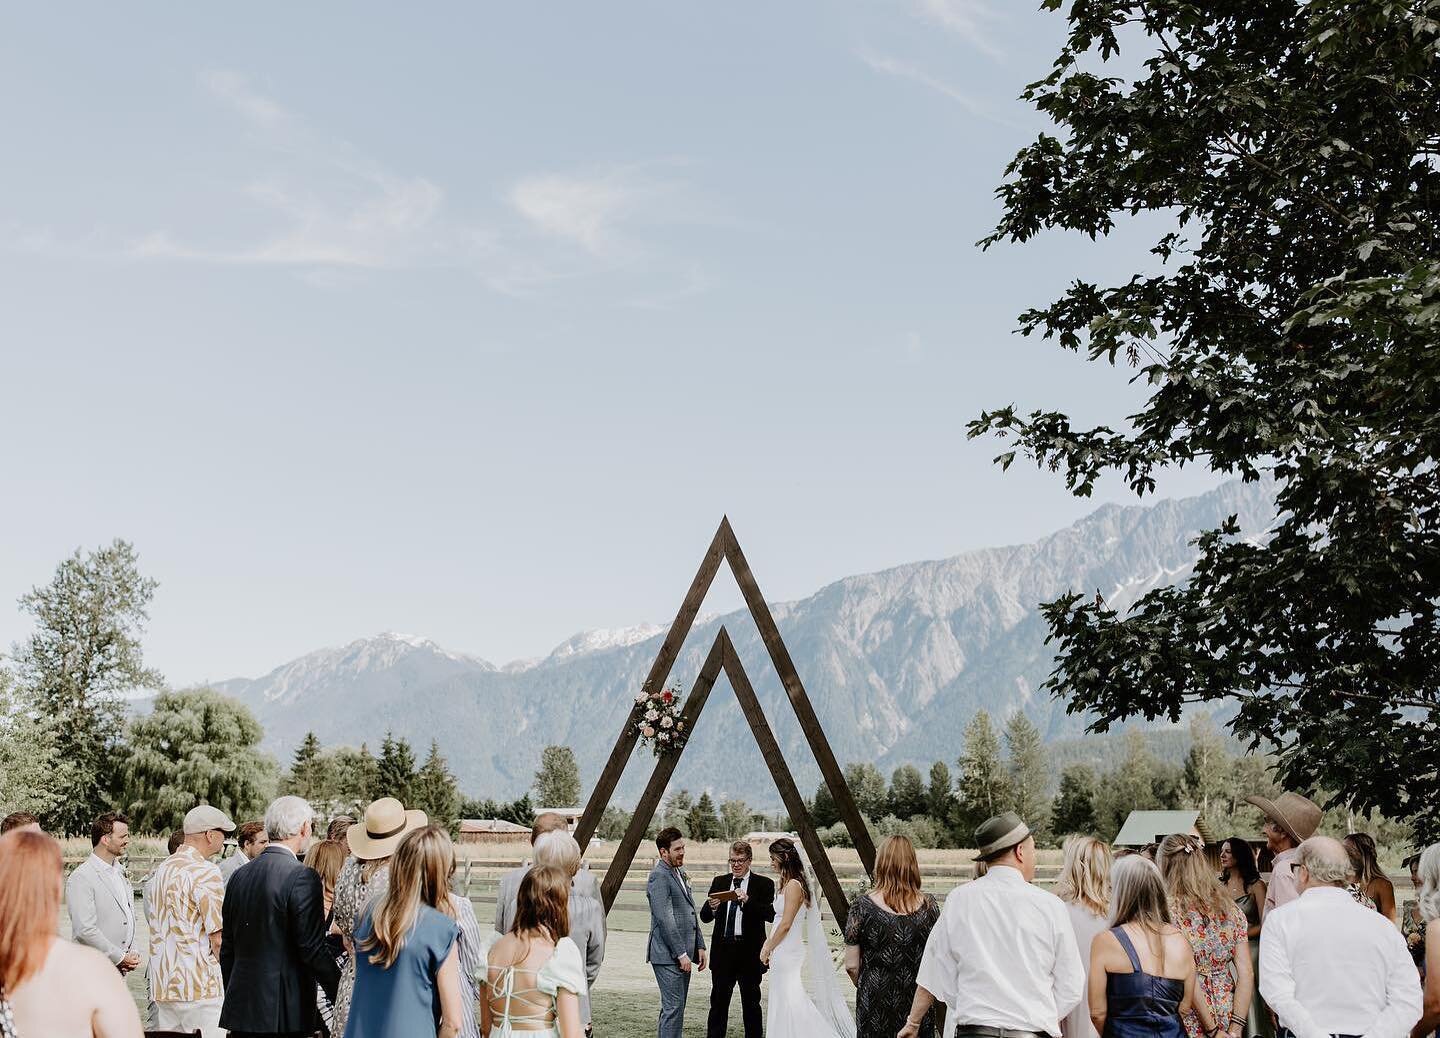 A picture perfect day for M &amp; B ☀️ 

We can&rsquo;t get enough of this stunning mountain view! Would you consider an outdoor ceremony with a backdrop like this? 

Take a look at the amazing team we worked alongside on this day &darr;

___________